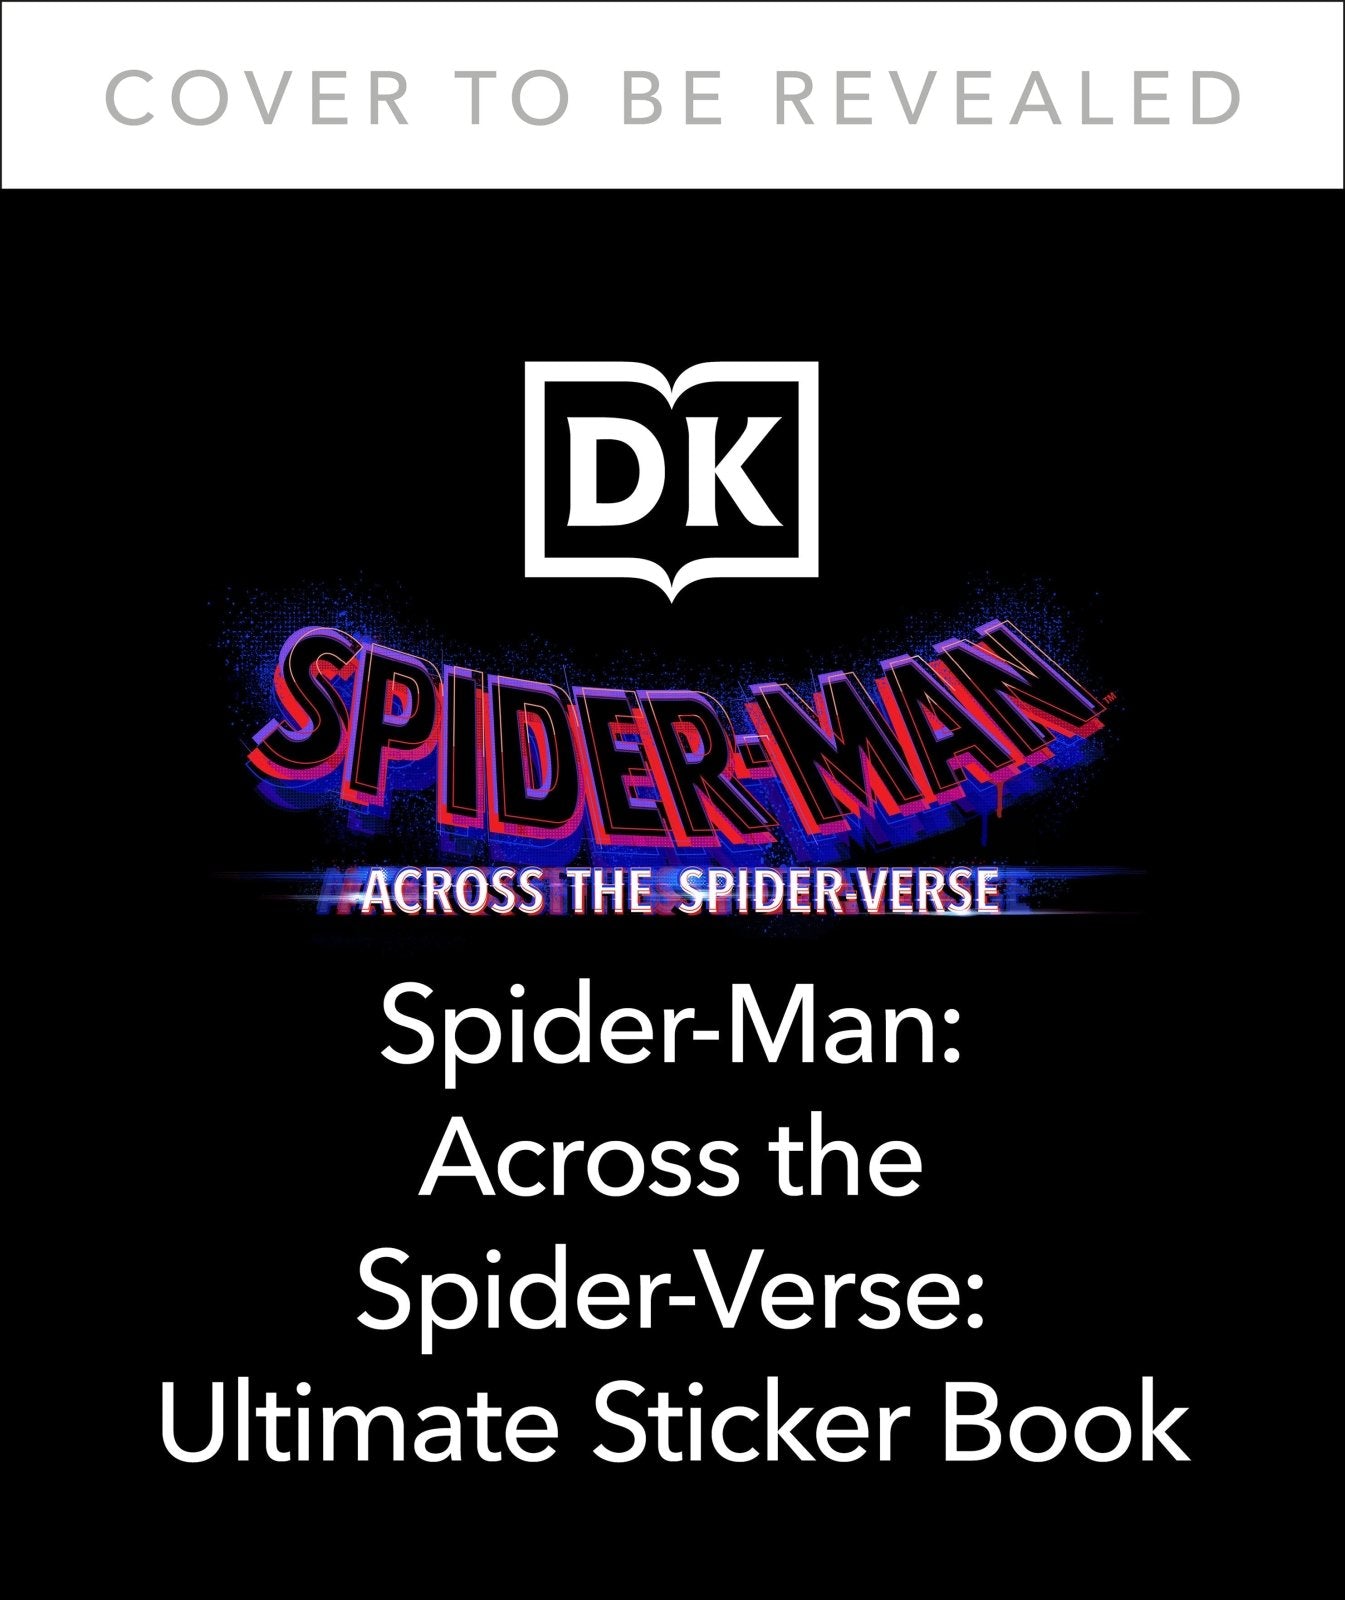 Marvel Spider-Man Across the Spider-Verse Ultimate Sticker Book by